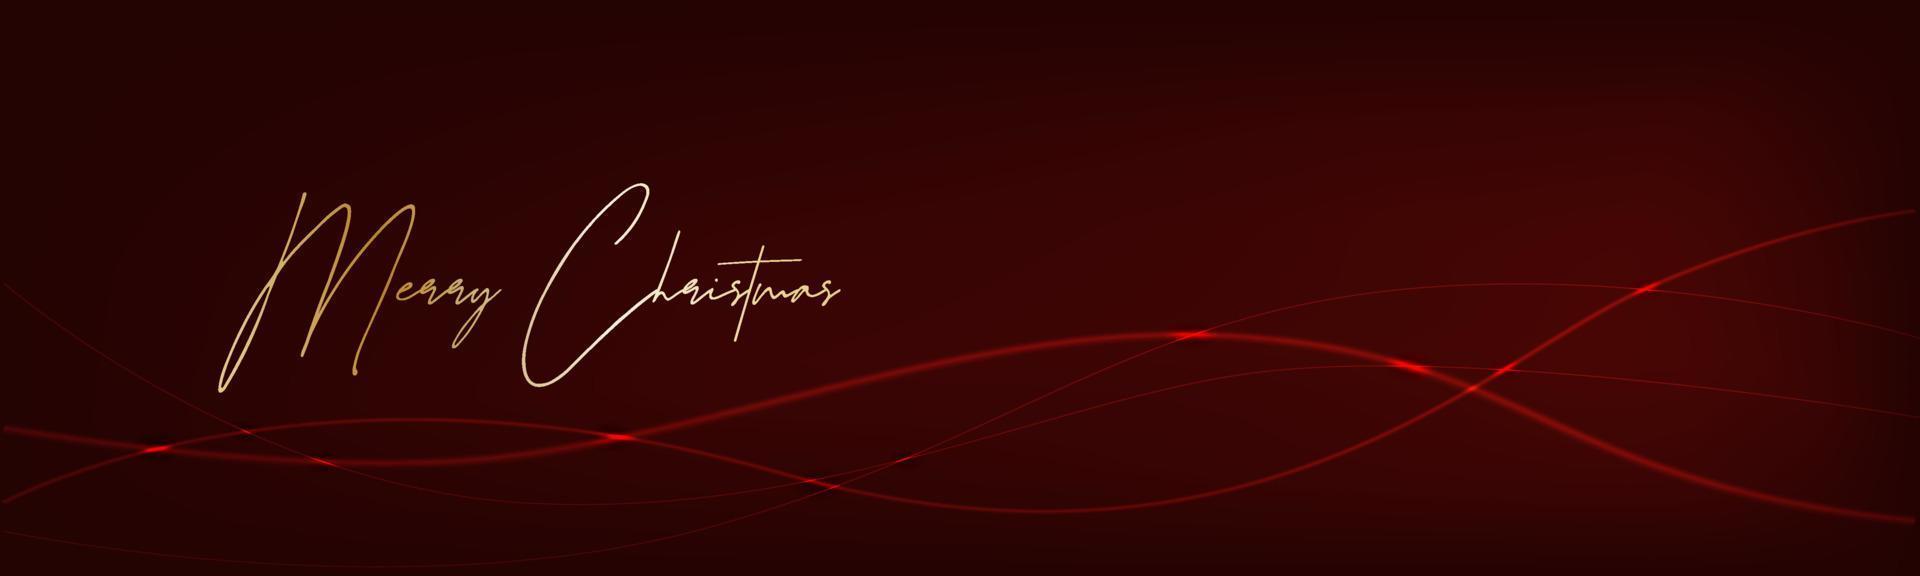 Merry Christmas banner red vector